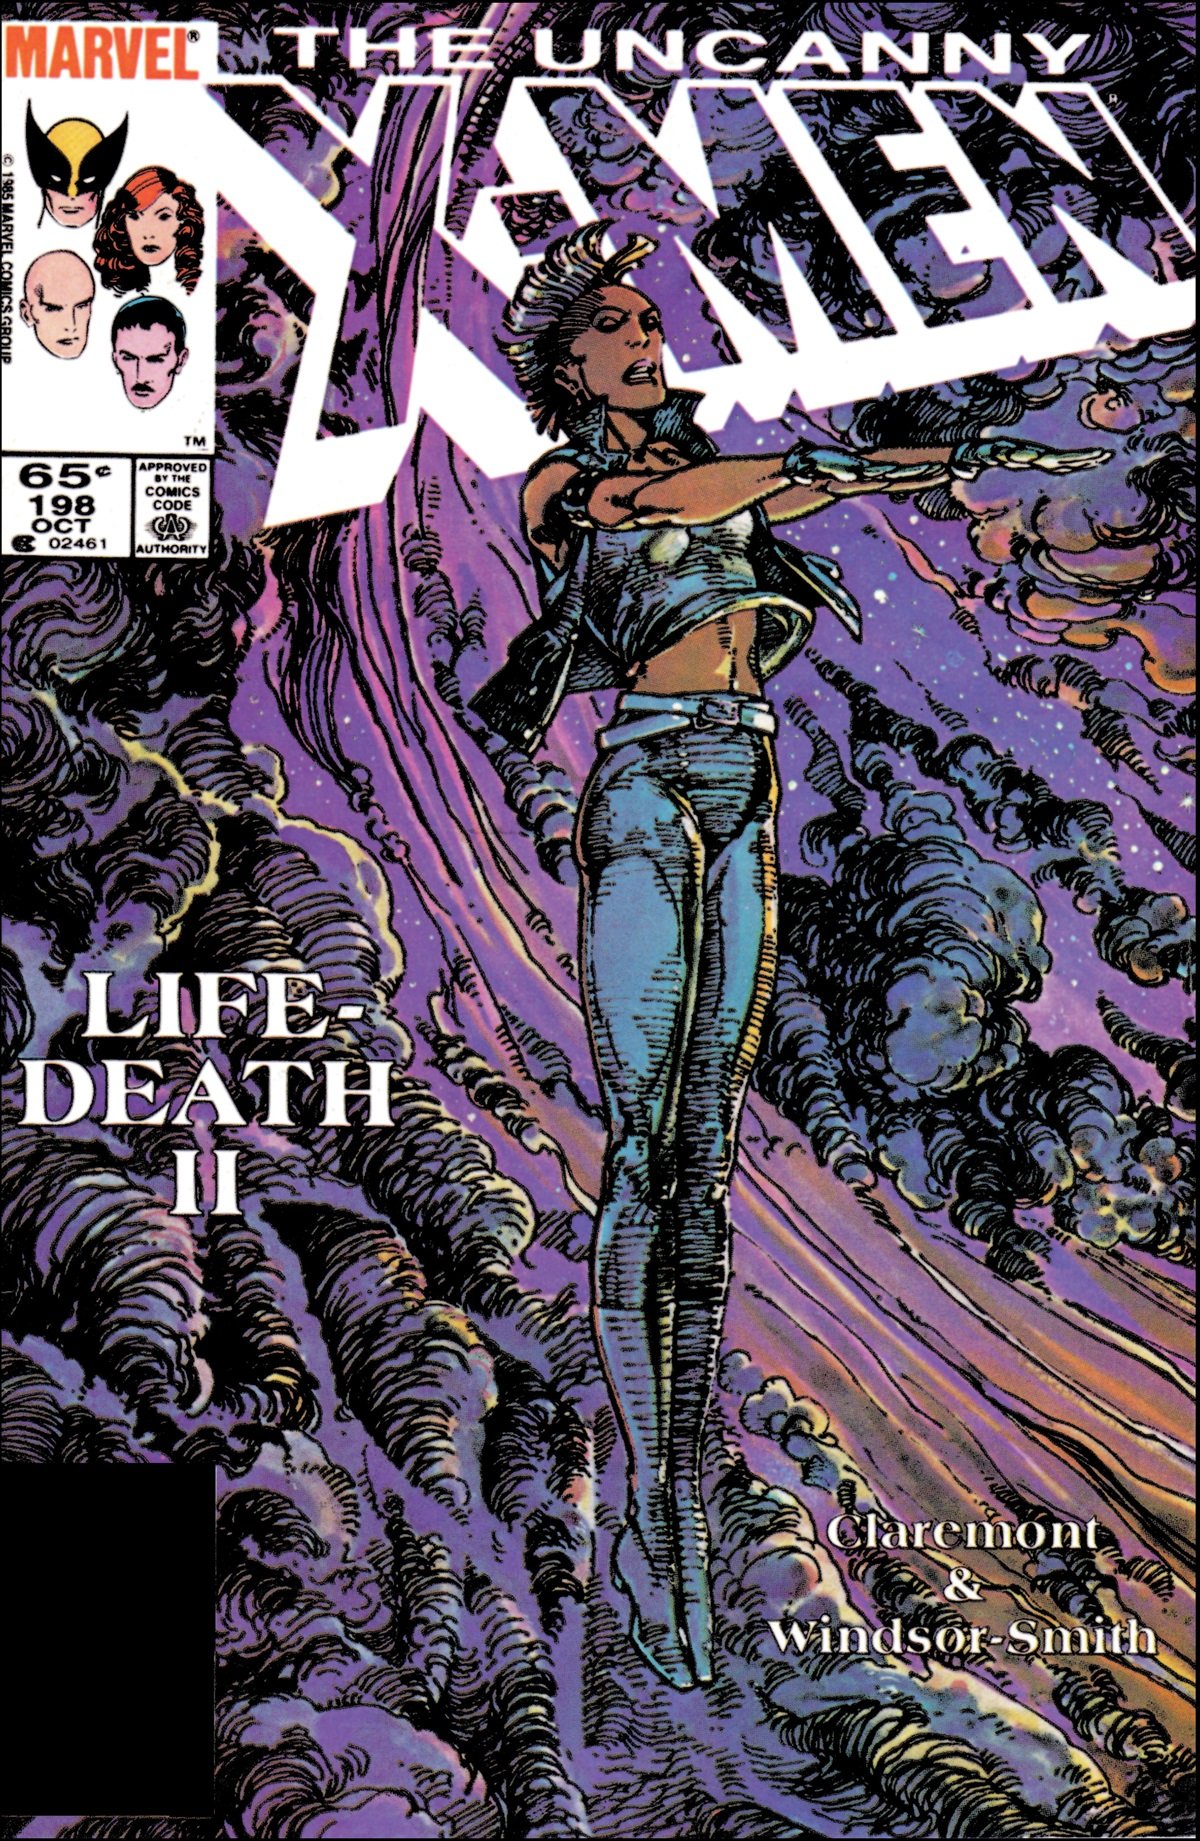 The cover for Uncanny X-Men #198 by Barry Windsor-Smith.